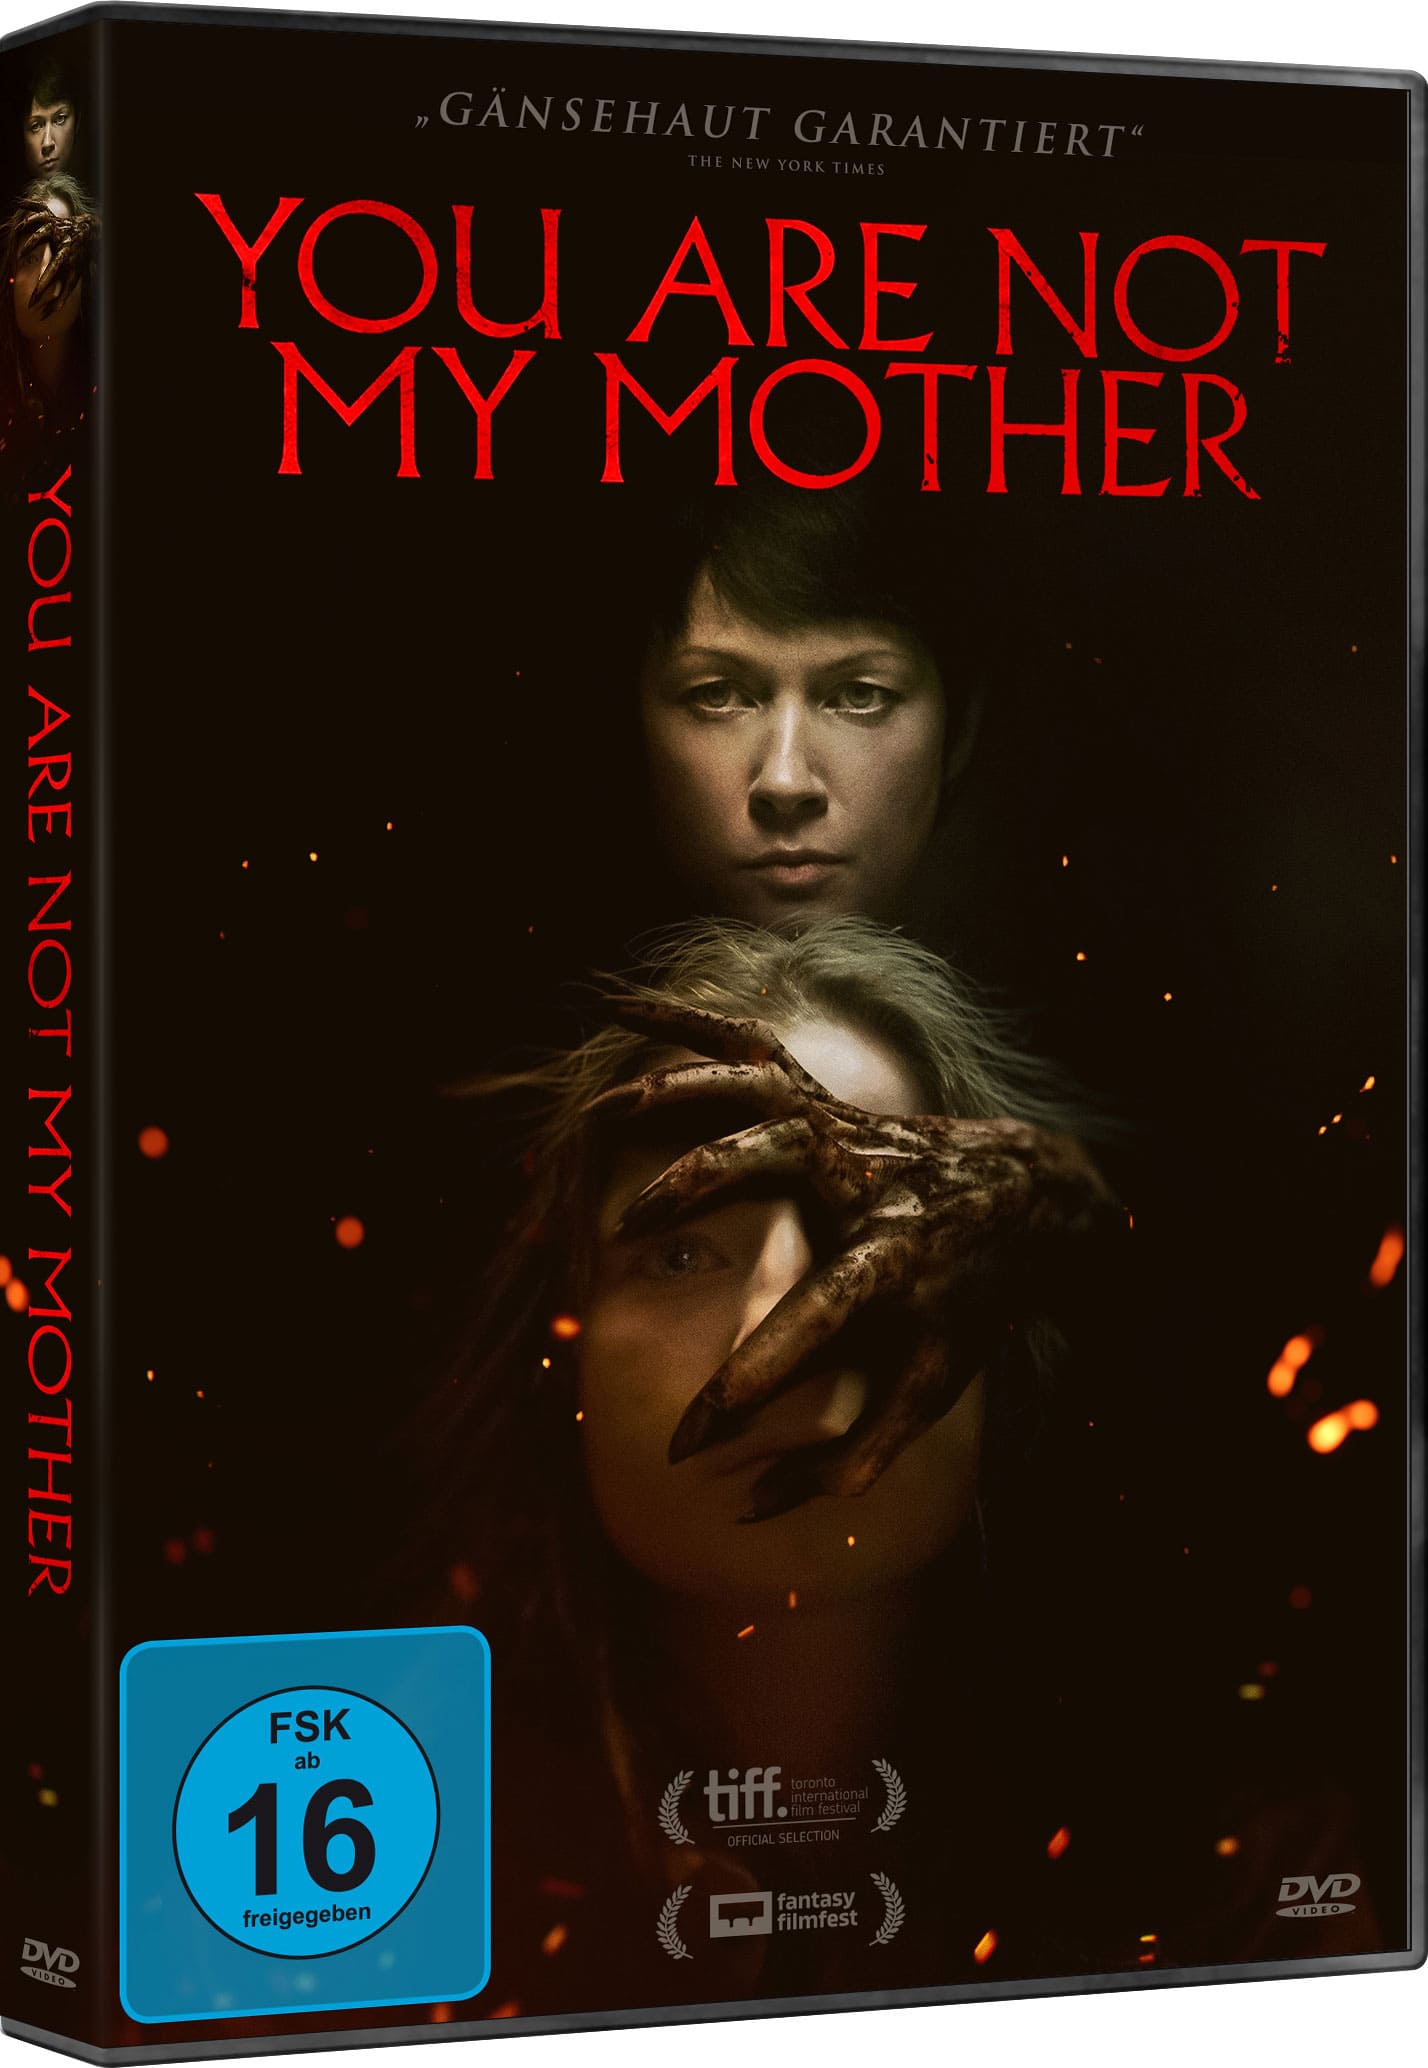 You Are Not My Mother (DVD) Image 2